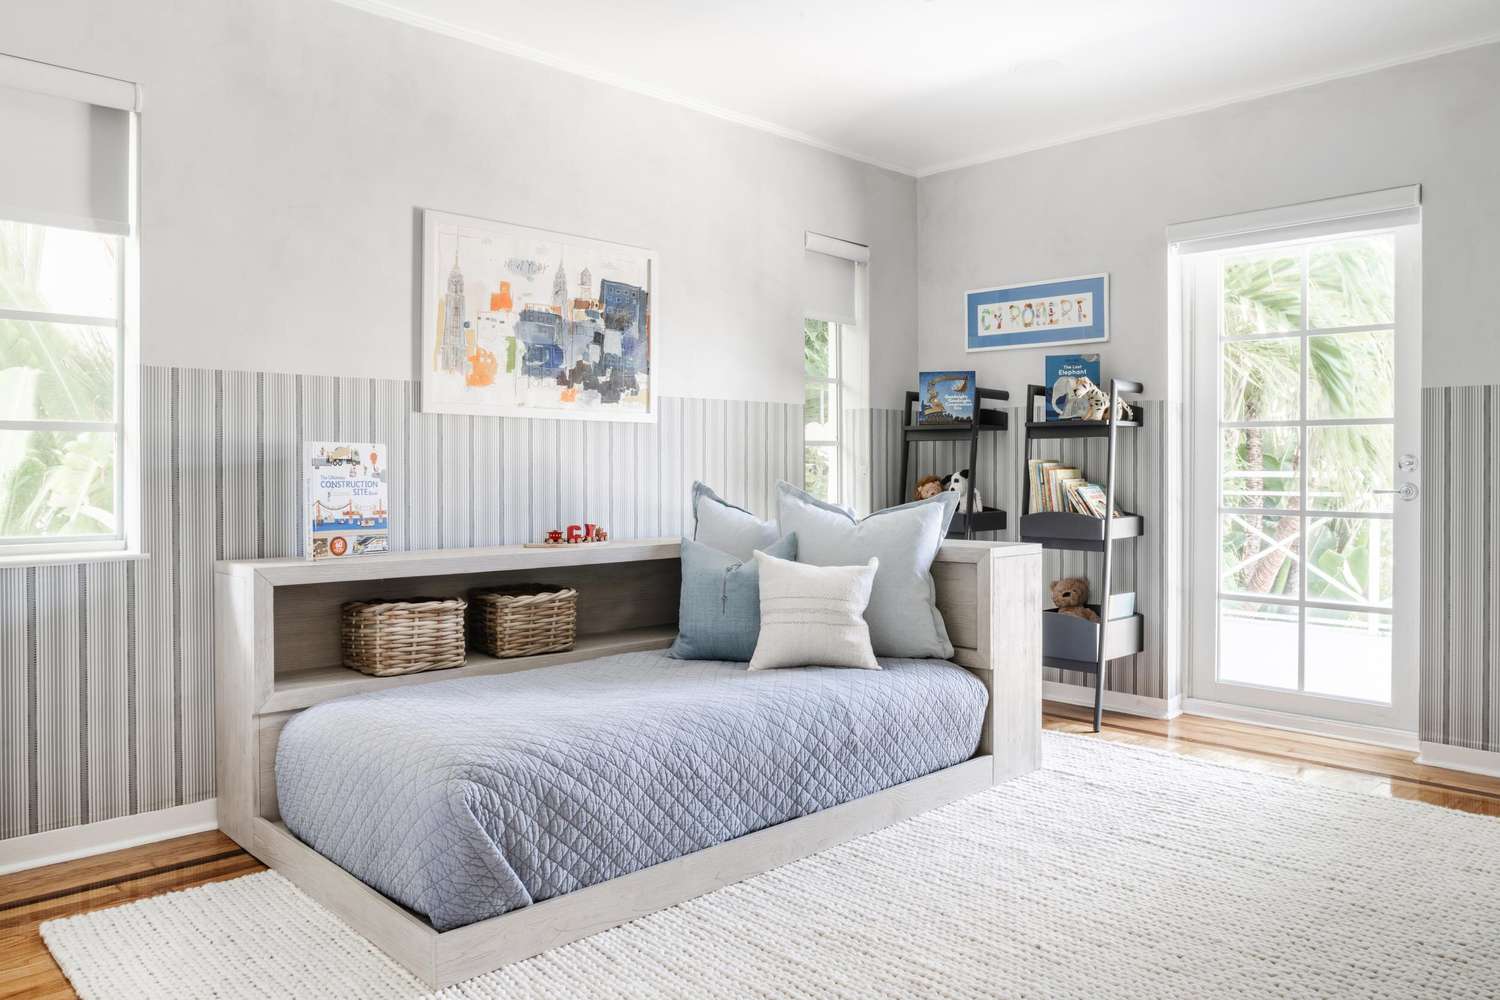 Kids' bedroom with light blue bedding and accents and light gray walls